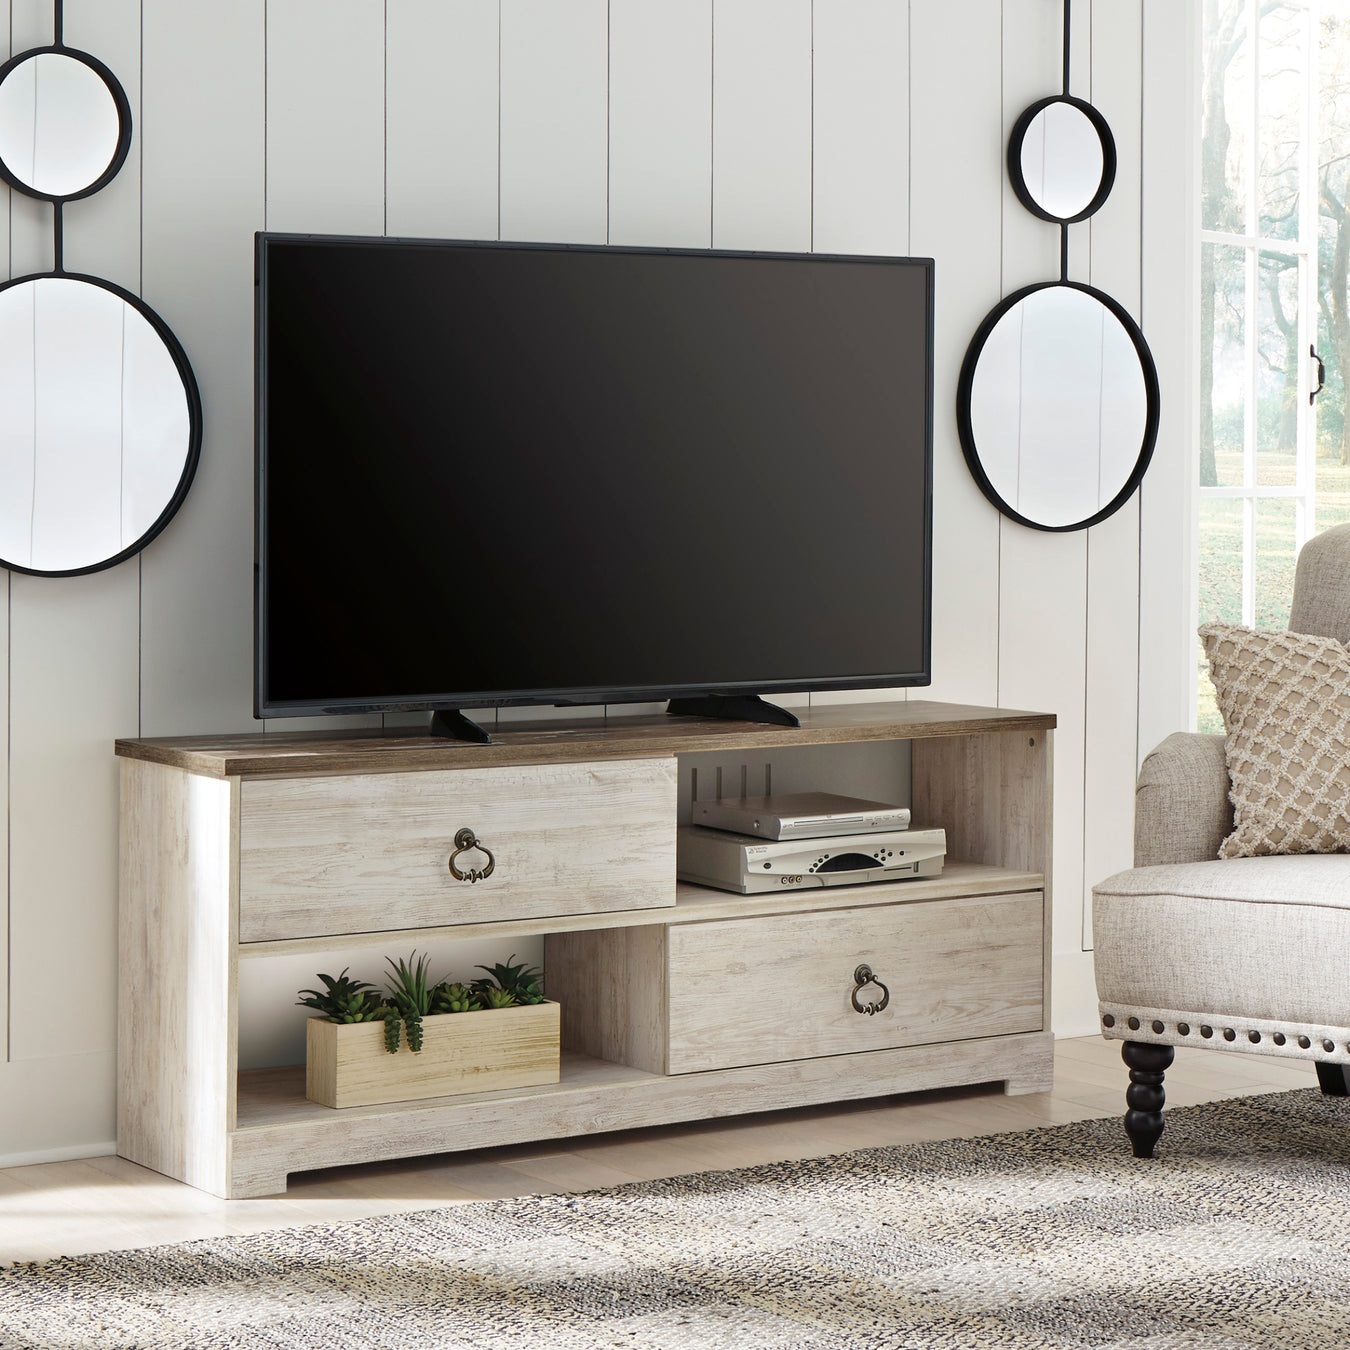 Shop TV Stands and Entertainment Centers at JR Furniture Store in Fayetteville, NC 28311